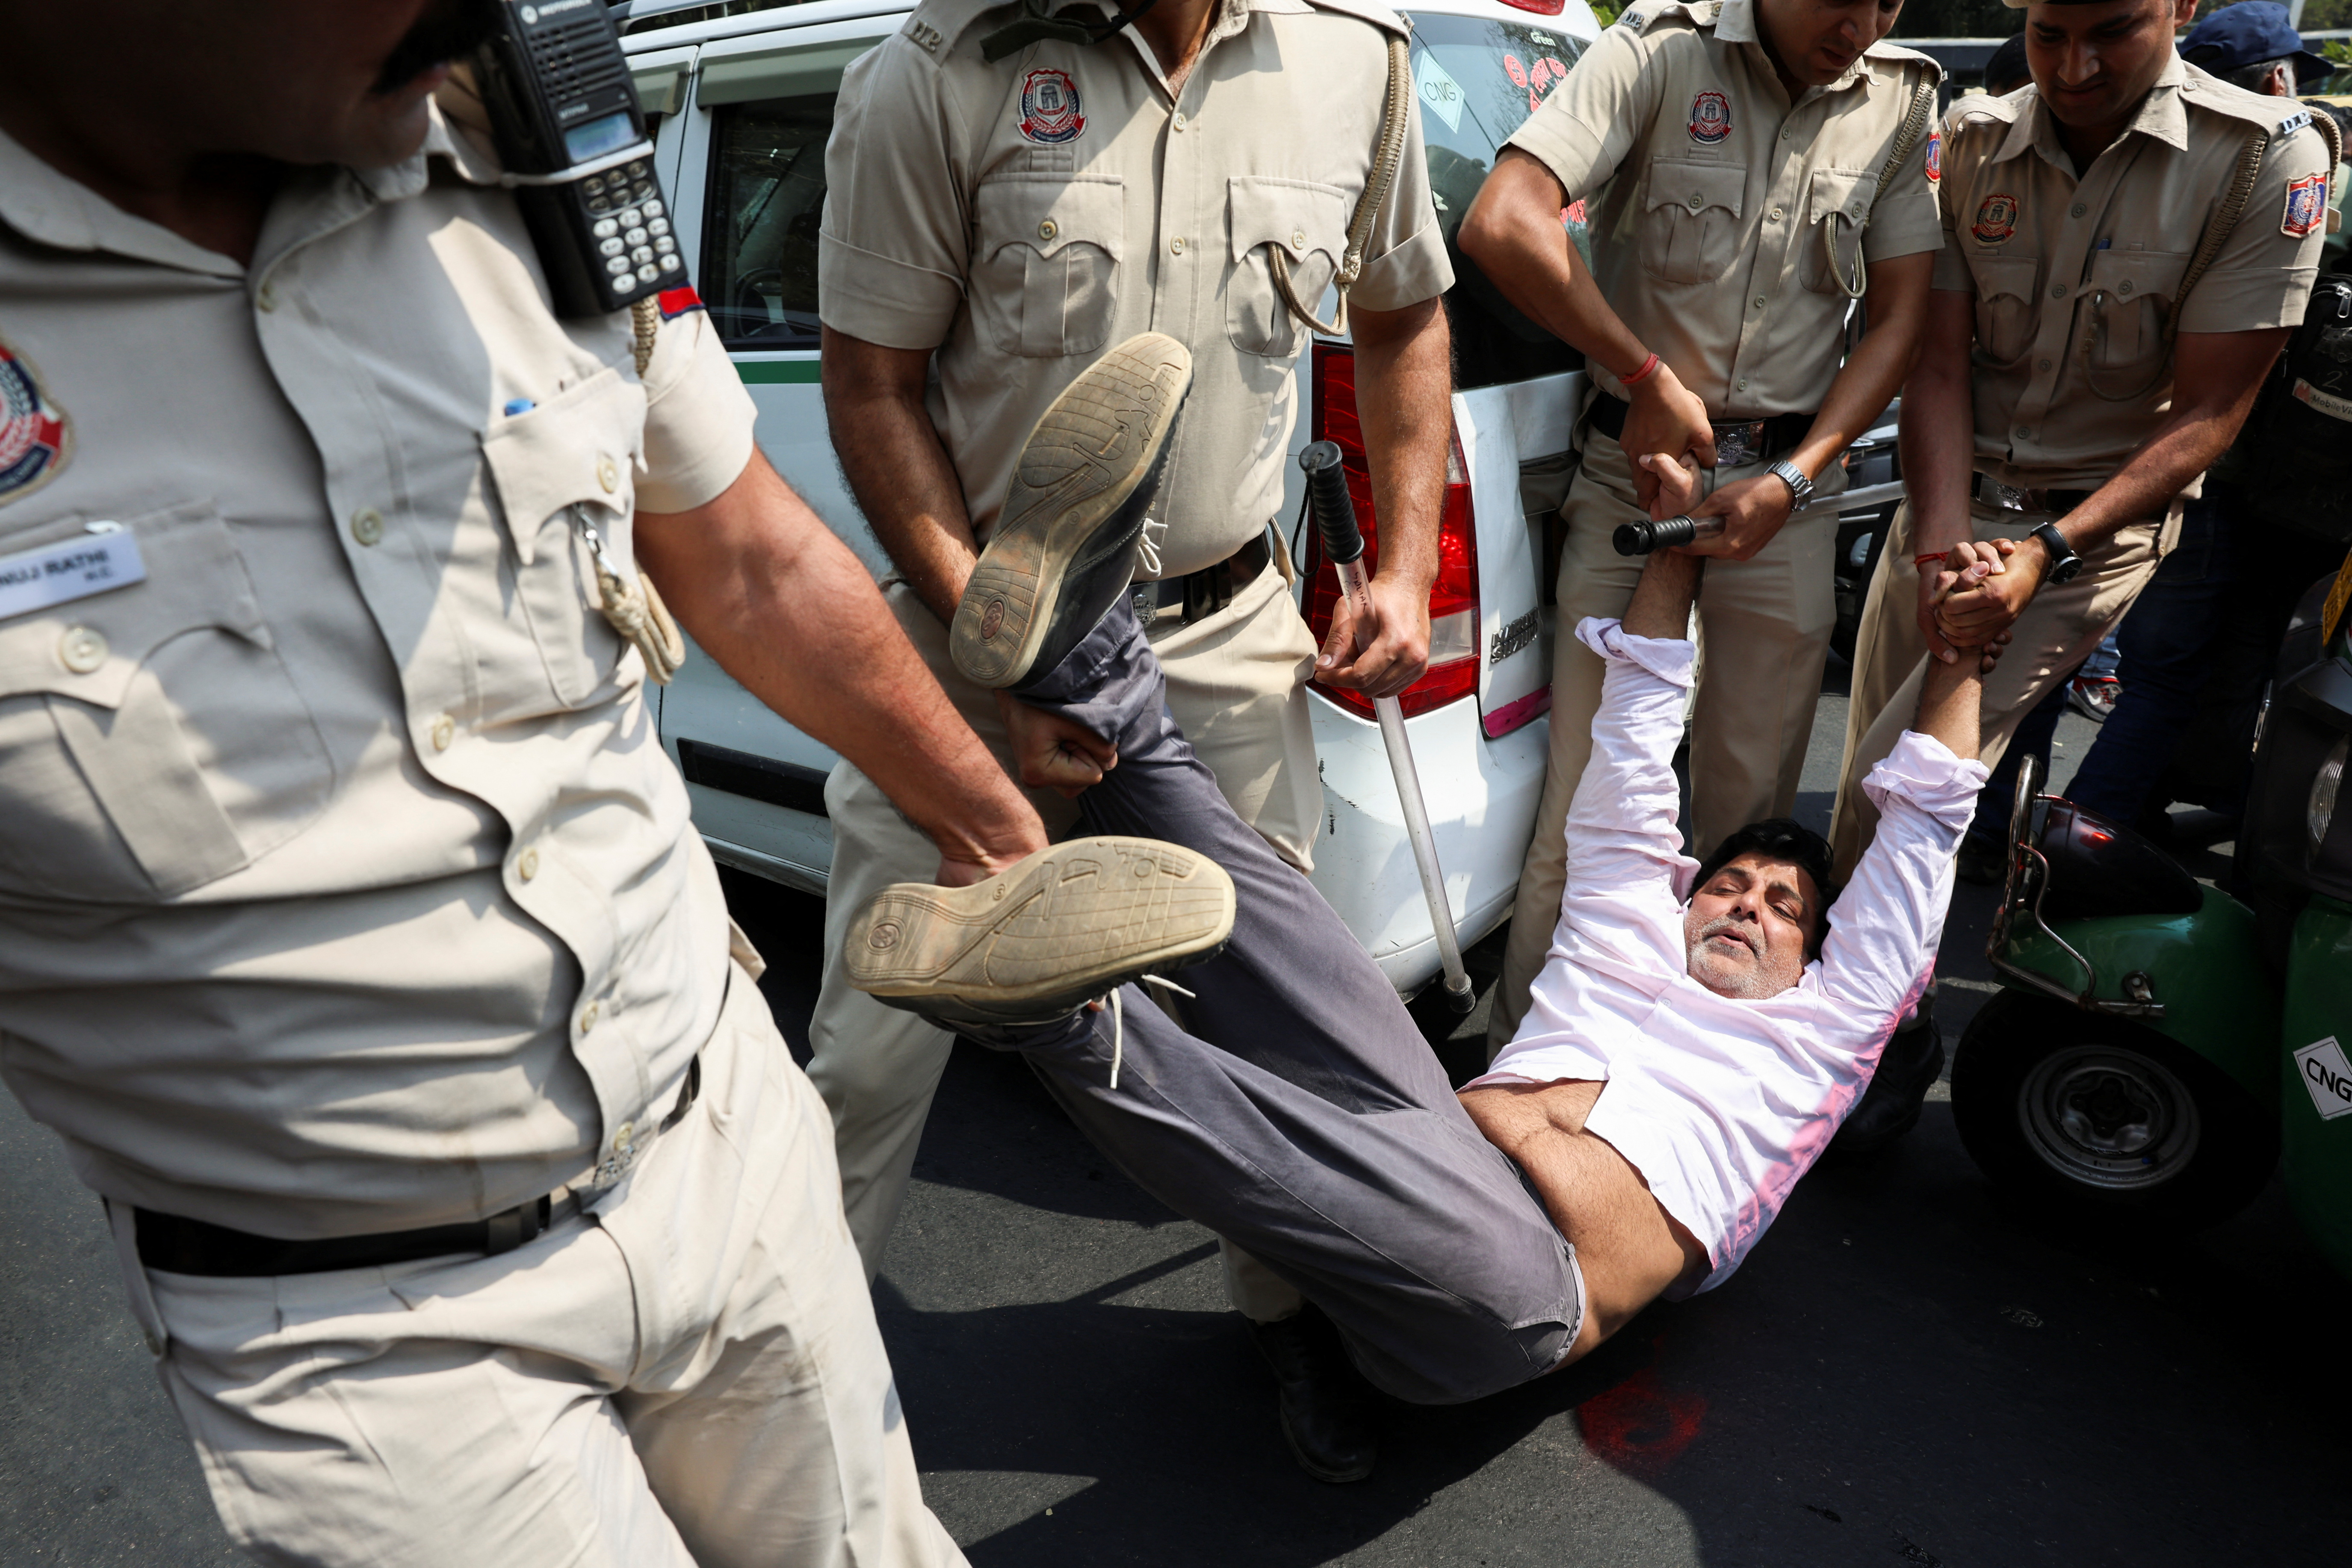 AAP supporters protest after the party's main leader and Delhi CM Arvind Kejriwal's arrest, in New Delhi